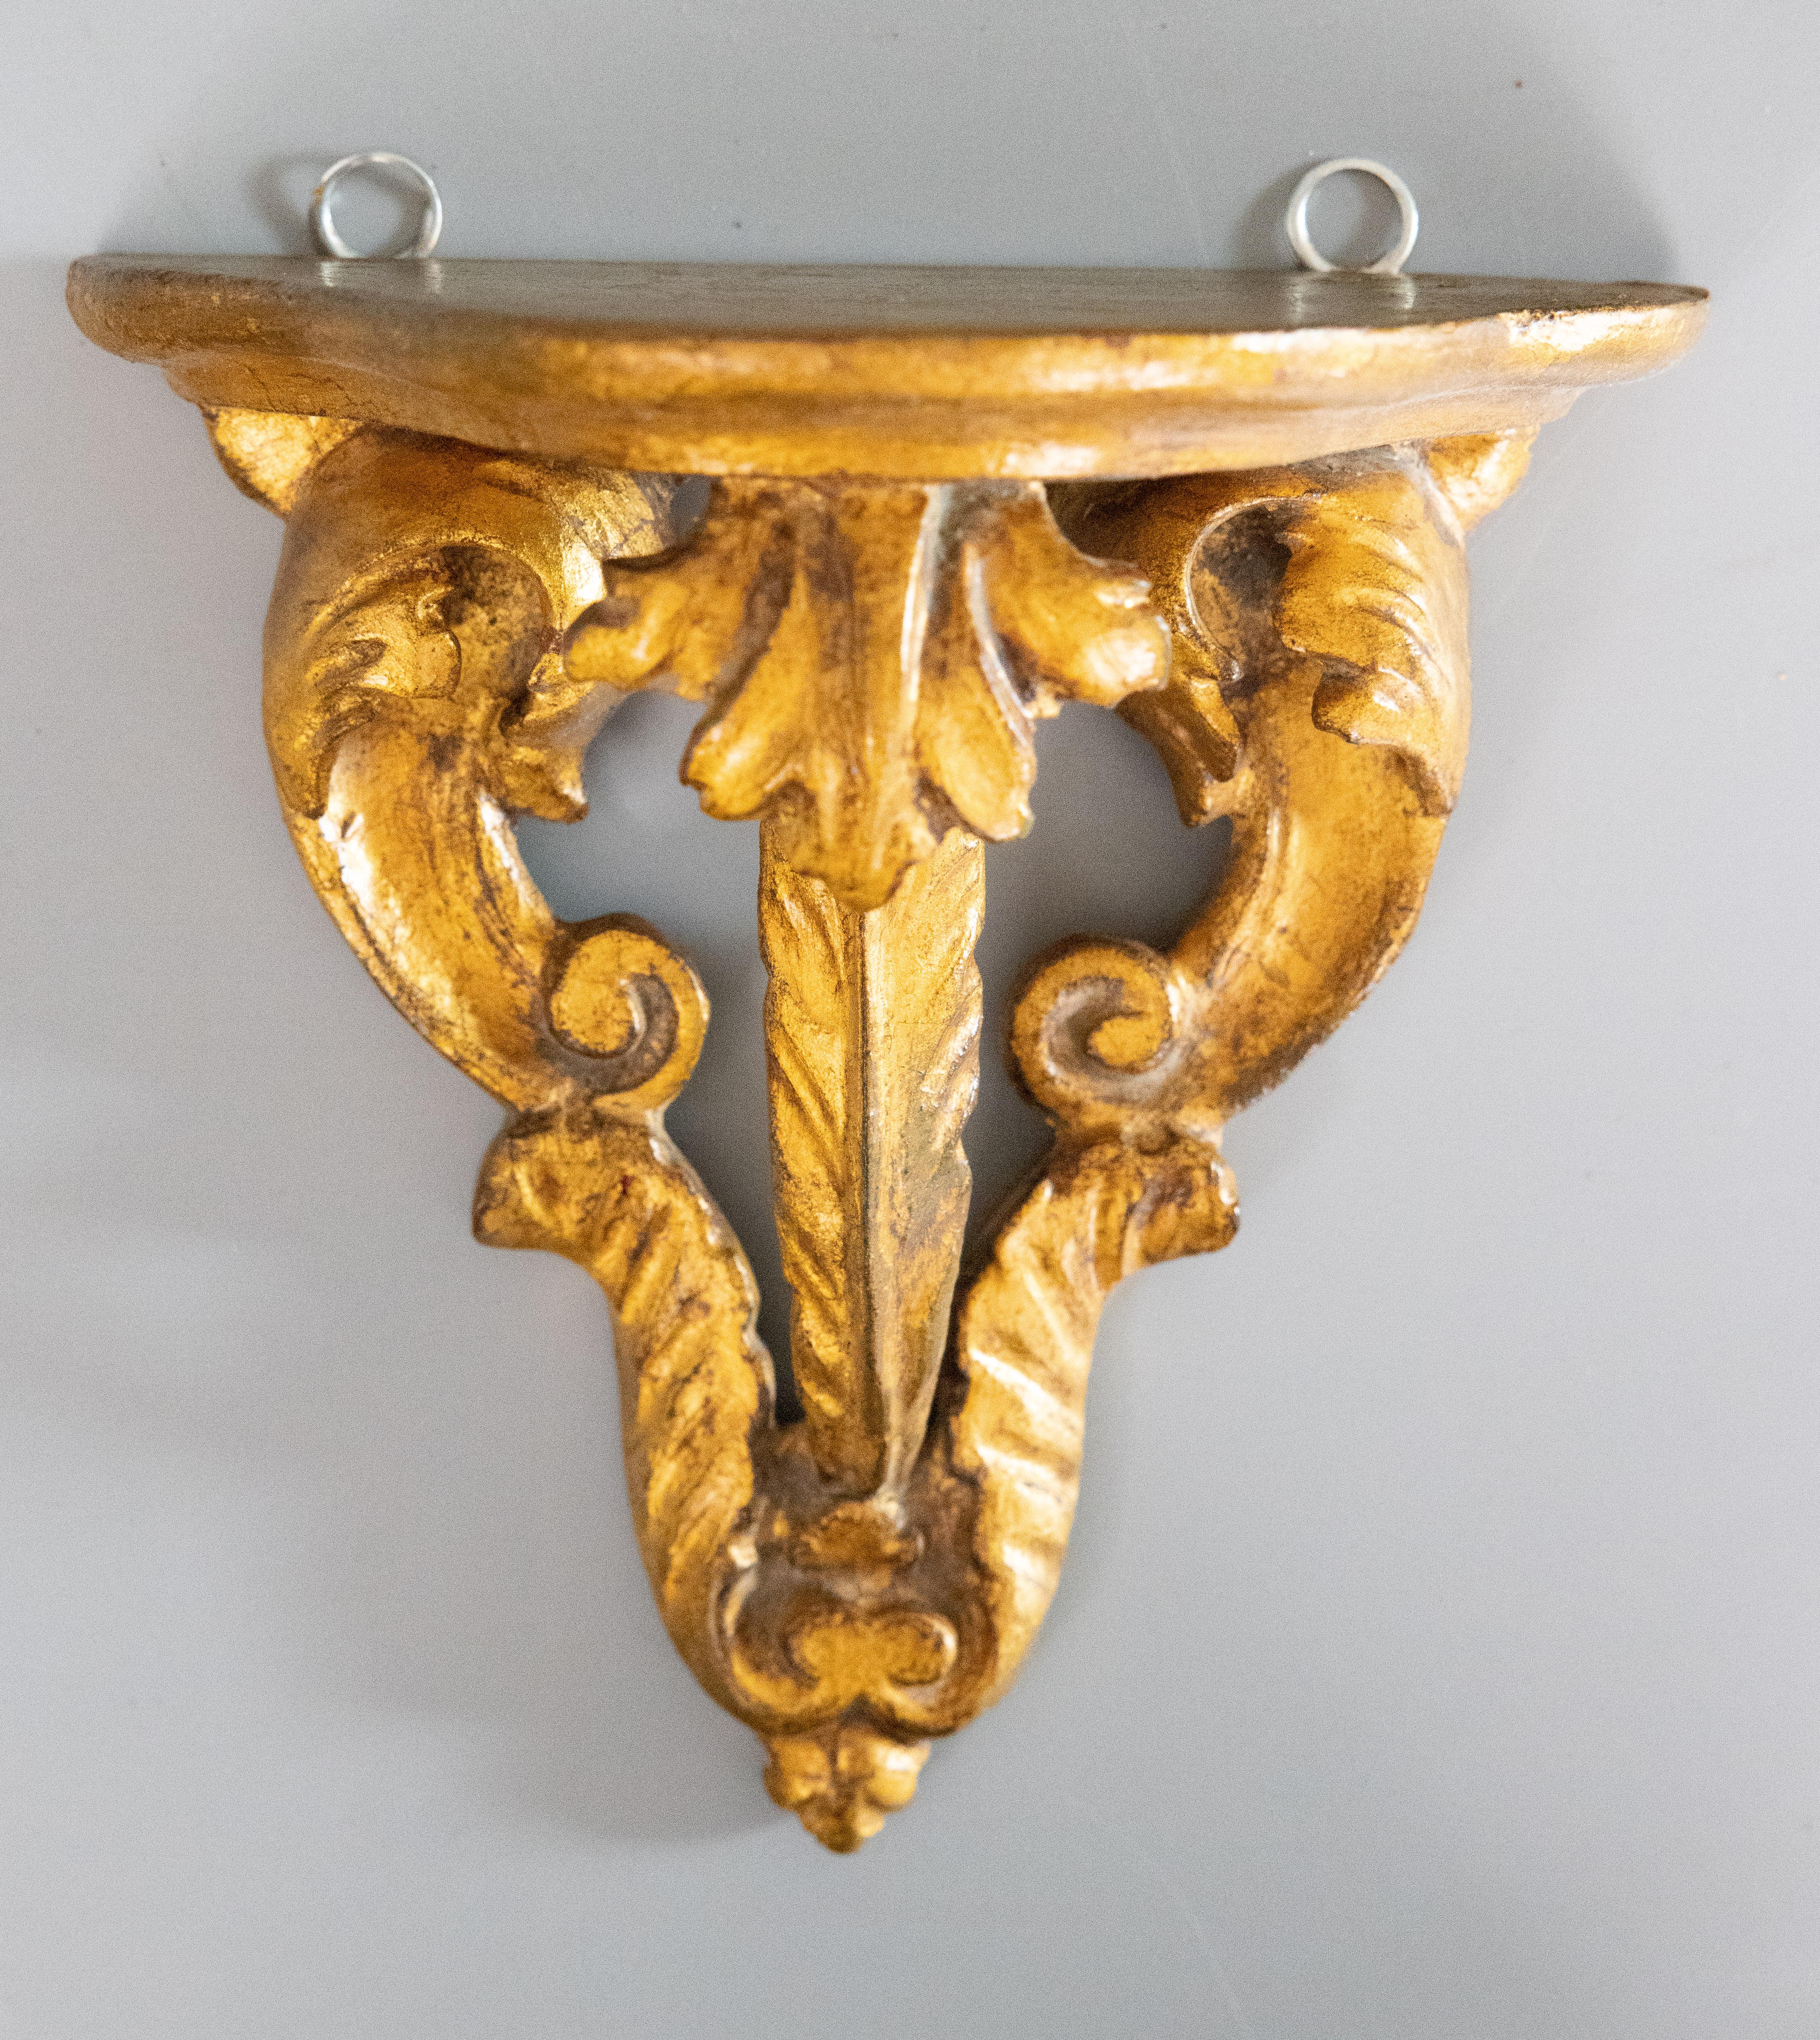 A lovely vintage Mid-Century Italian gilded wood wall bracket shelf. This stylish bracket has a hand carved scrolling acanthus leaf design and beautiful gilt patina. It's perfect for displaying decorative collectibles or fabulous on its